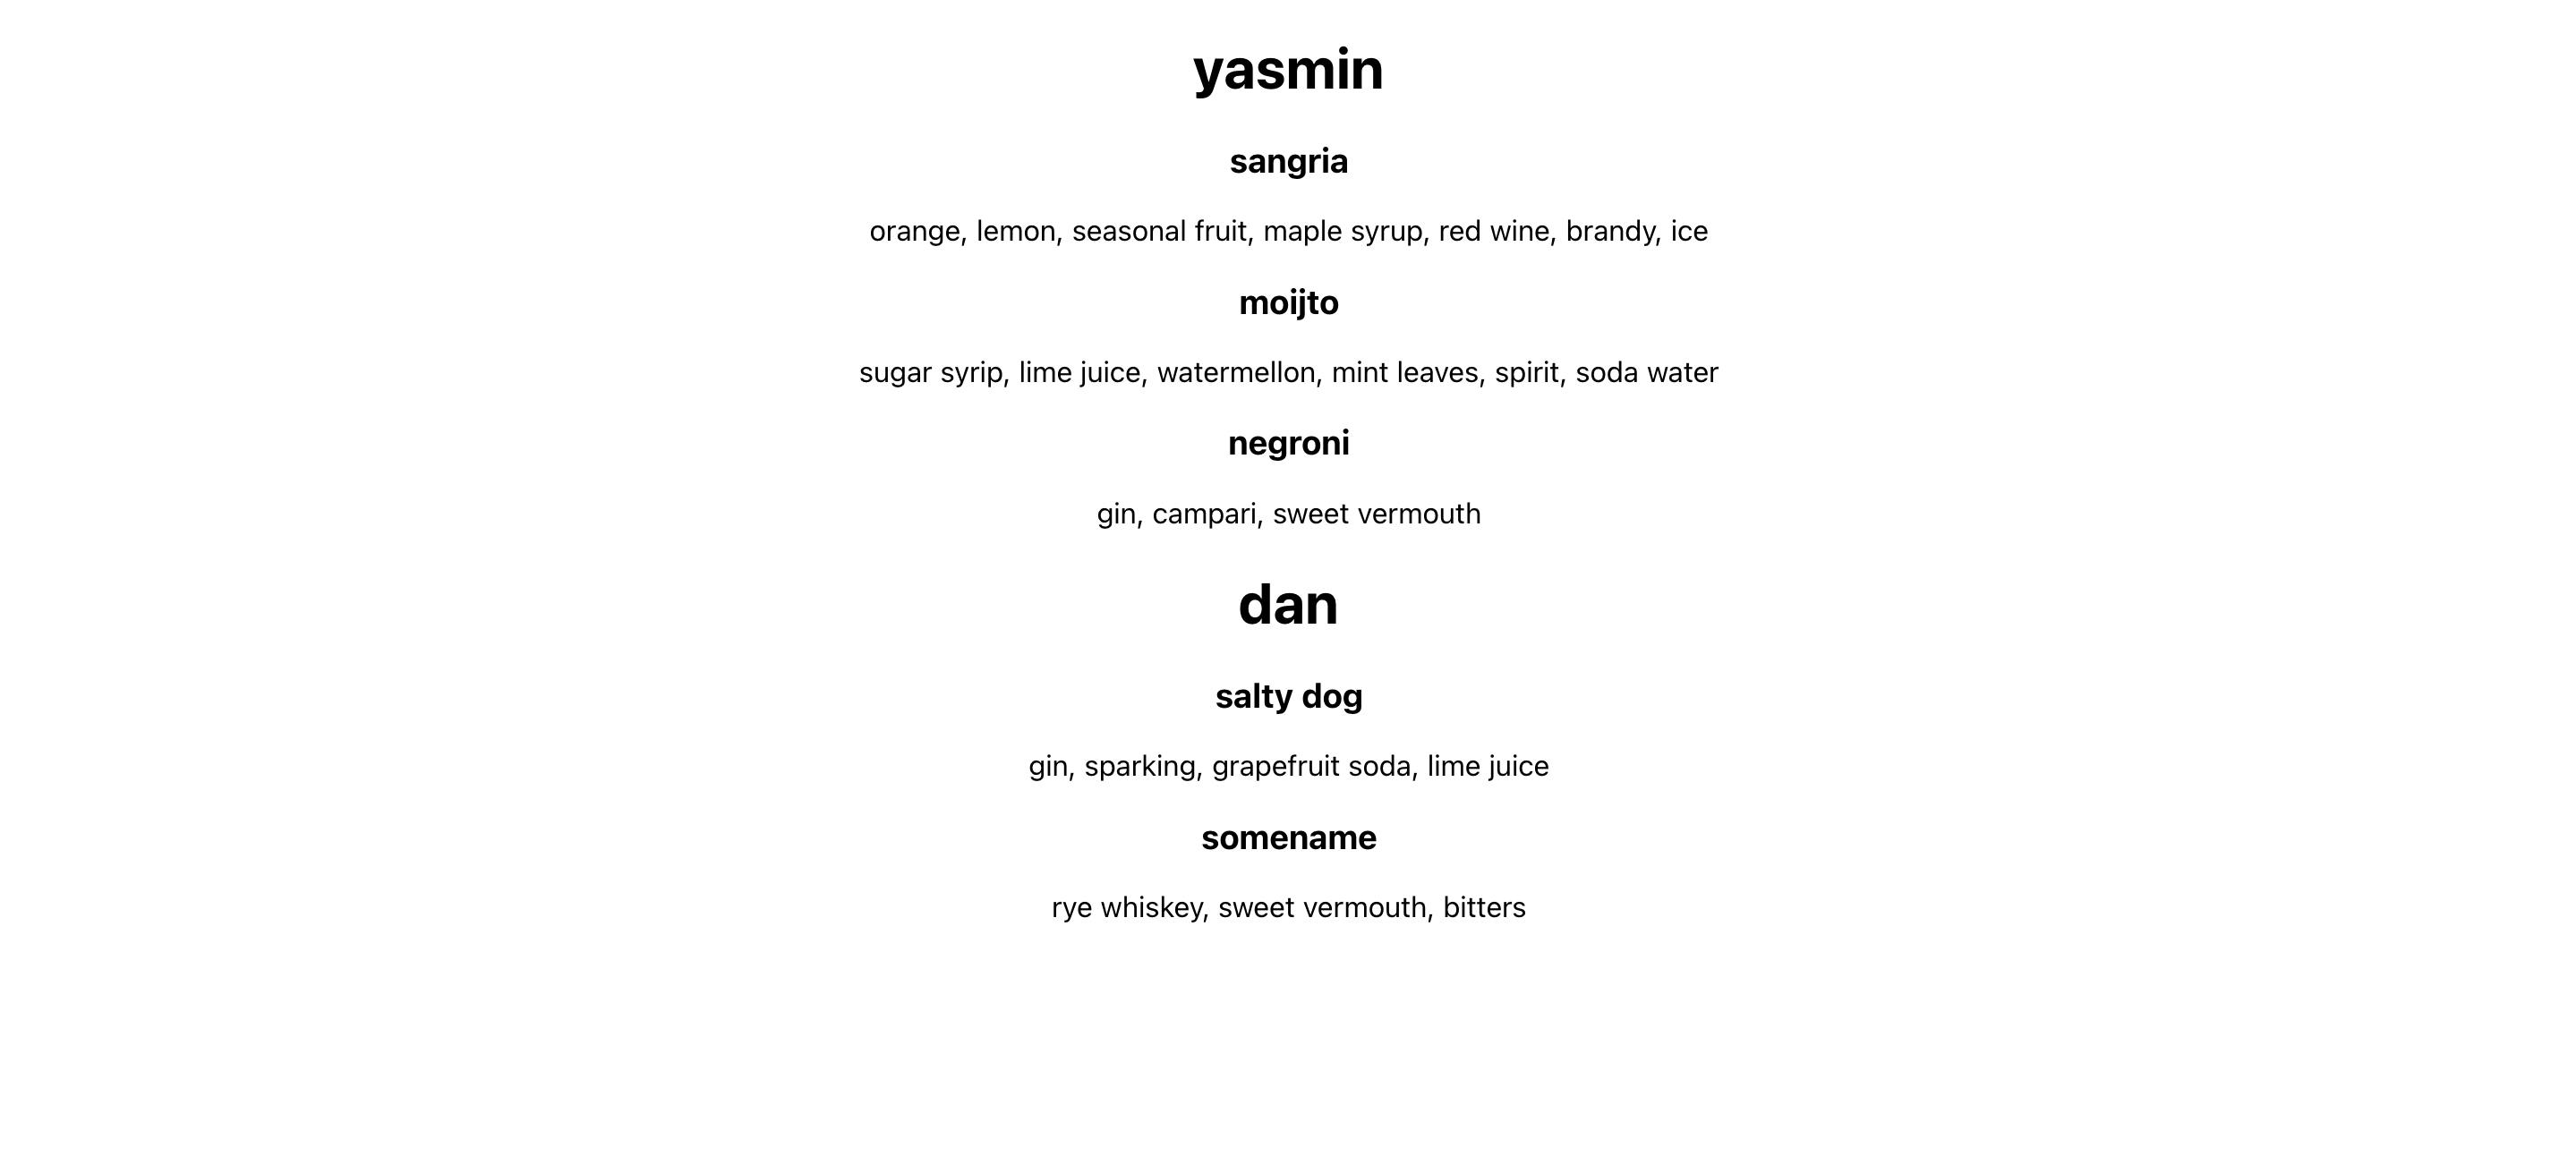 the name Yasmin followed by sangria and a list of ingredients, and the name Dan followed by a list of ingredients